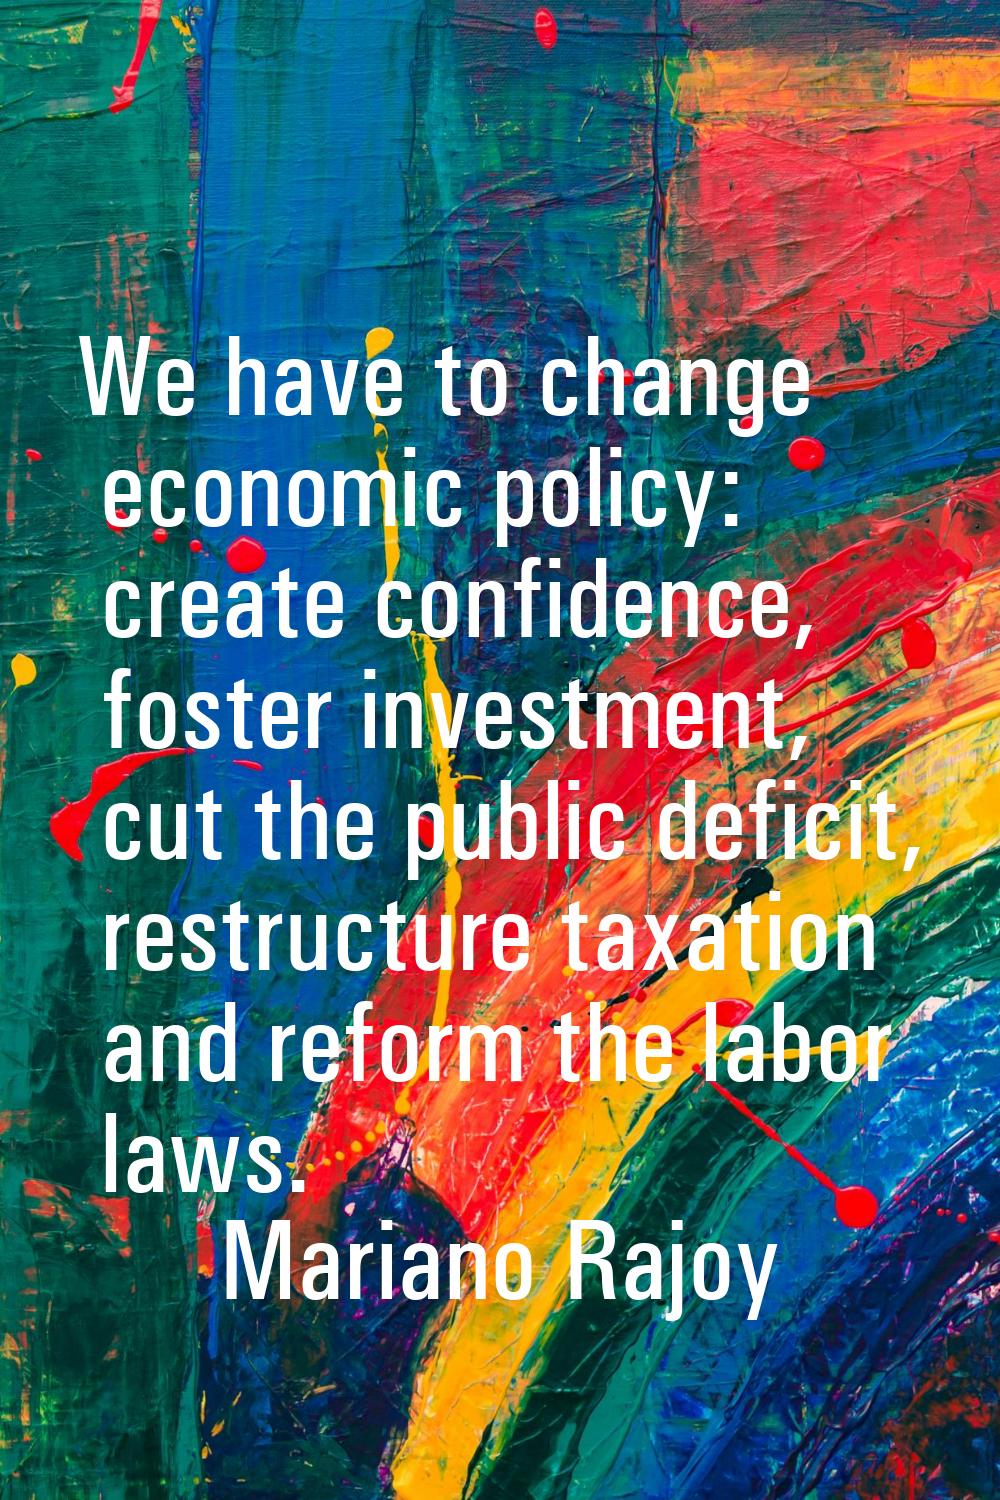 We have to change economic policy: create confidence, foster investment, cut the public deficit, re